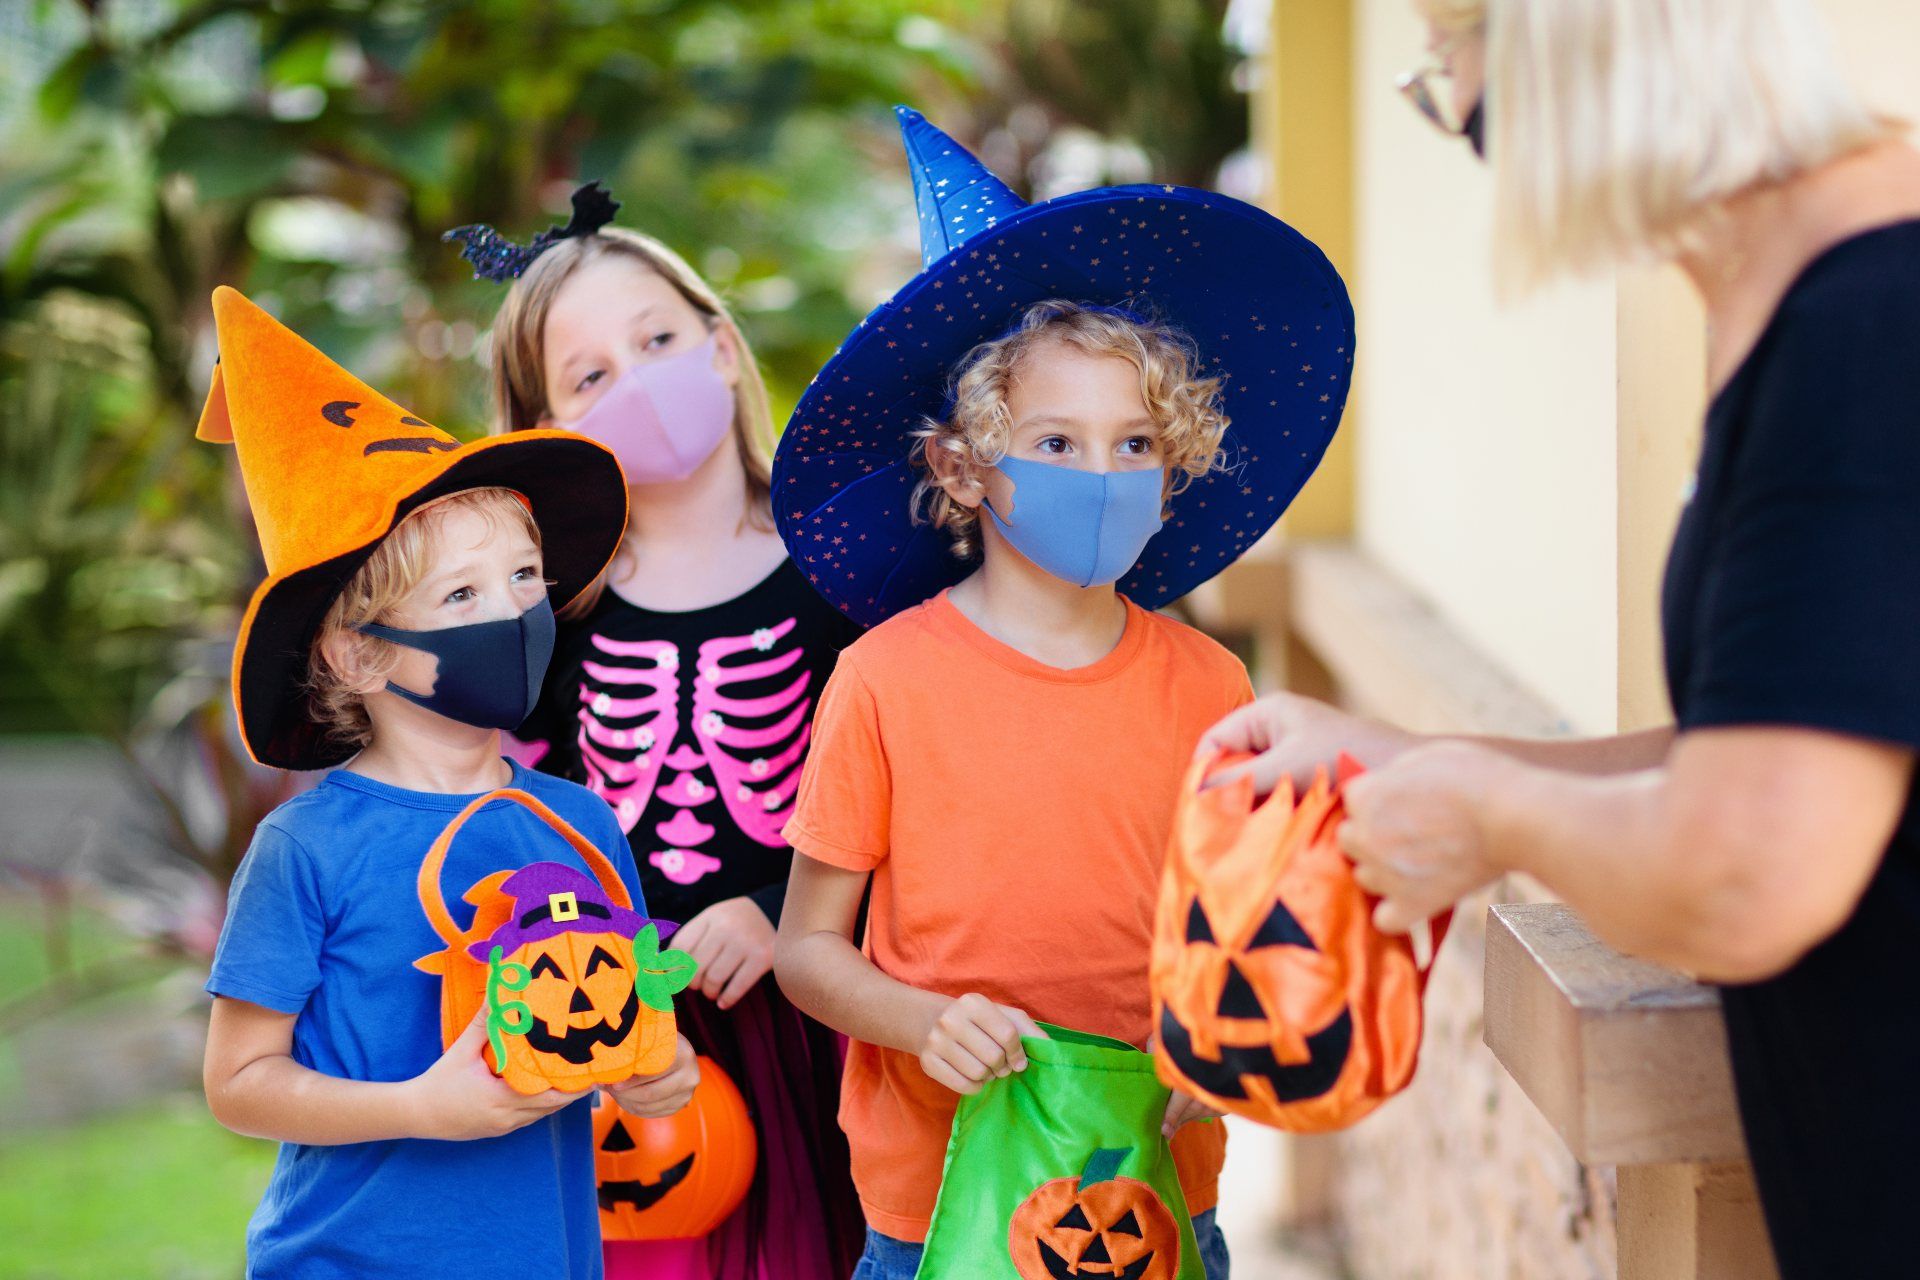 Children in face masks trick or treat on Halloween - halloween safety tips